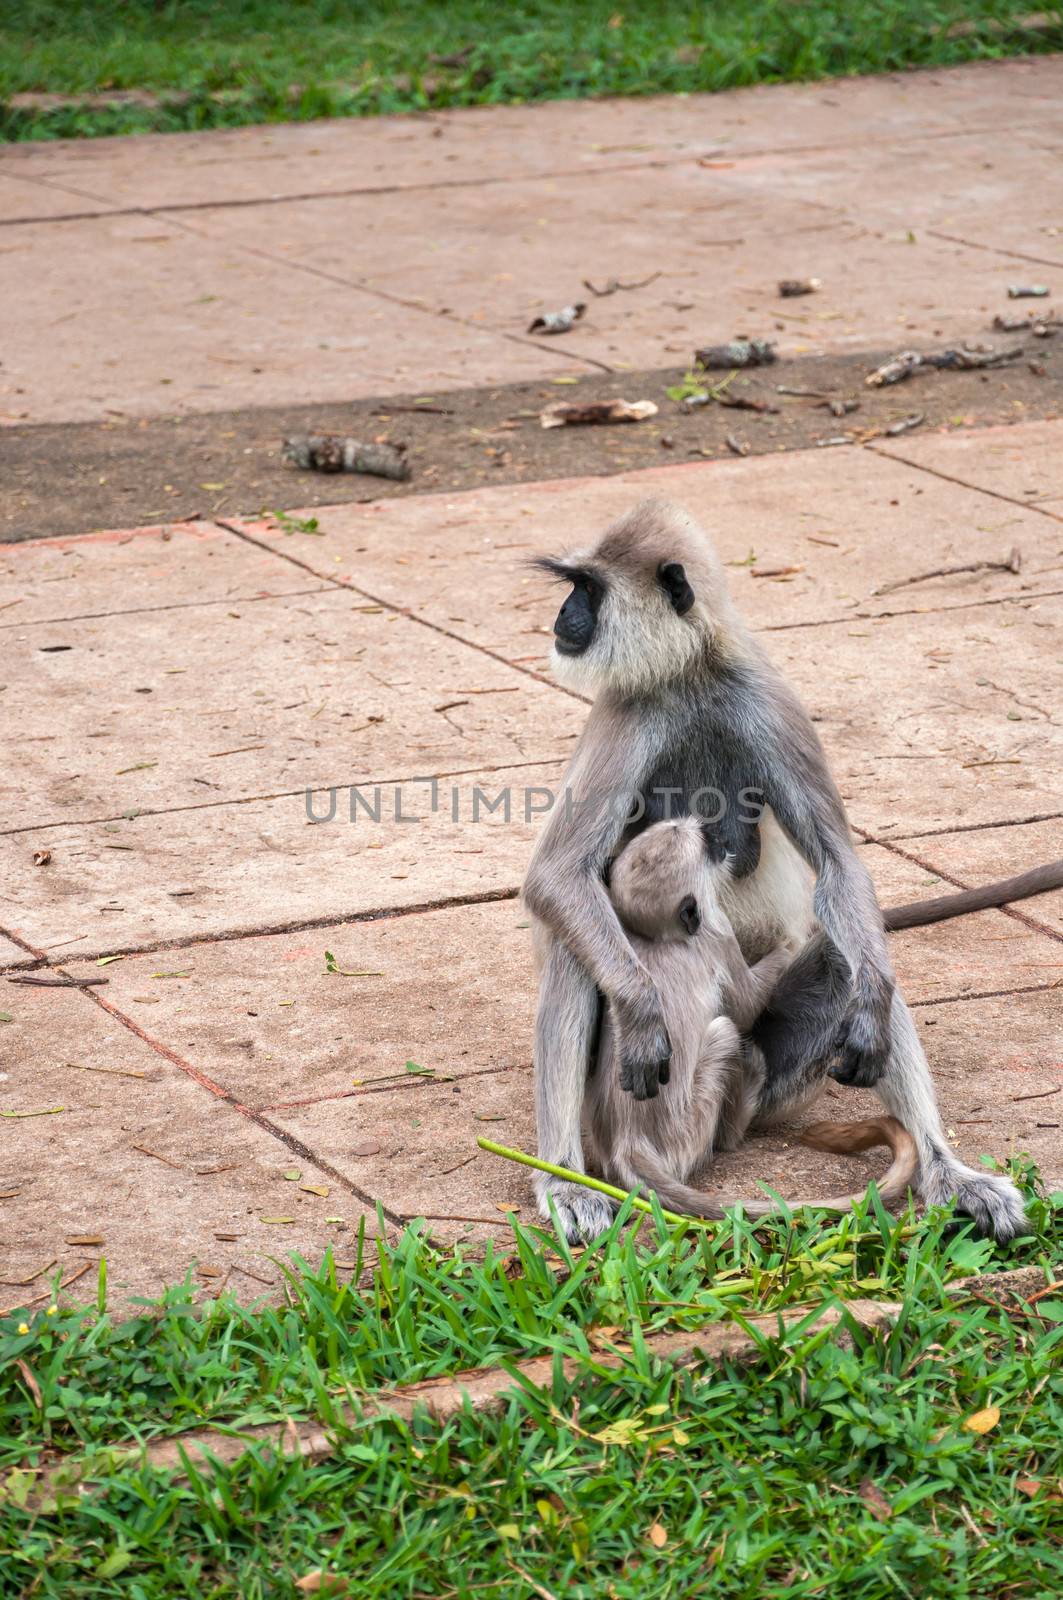 Hanuman langur with young by mkos83